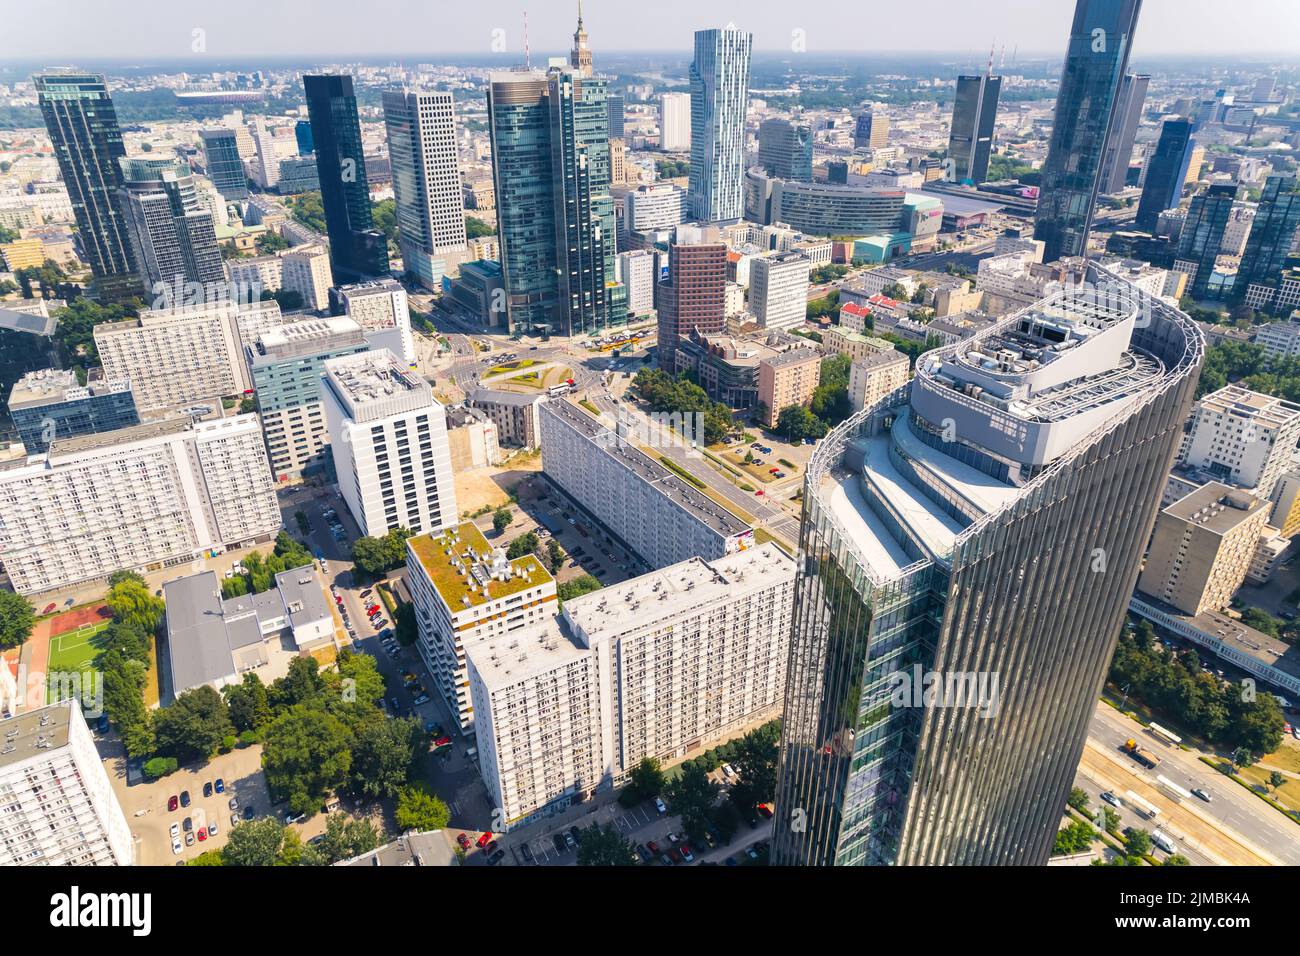 7.22.2022 Warsaw, Poland. Warsaw skyline presented by aerial drone view photograph taken during one of the summer days. Rondo 1 skyscraper in the foreground. High quality photo Stock Photo